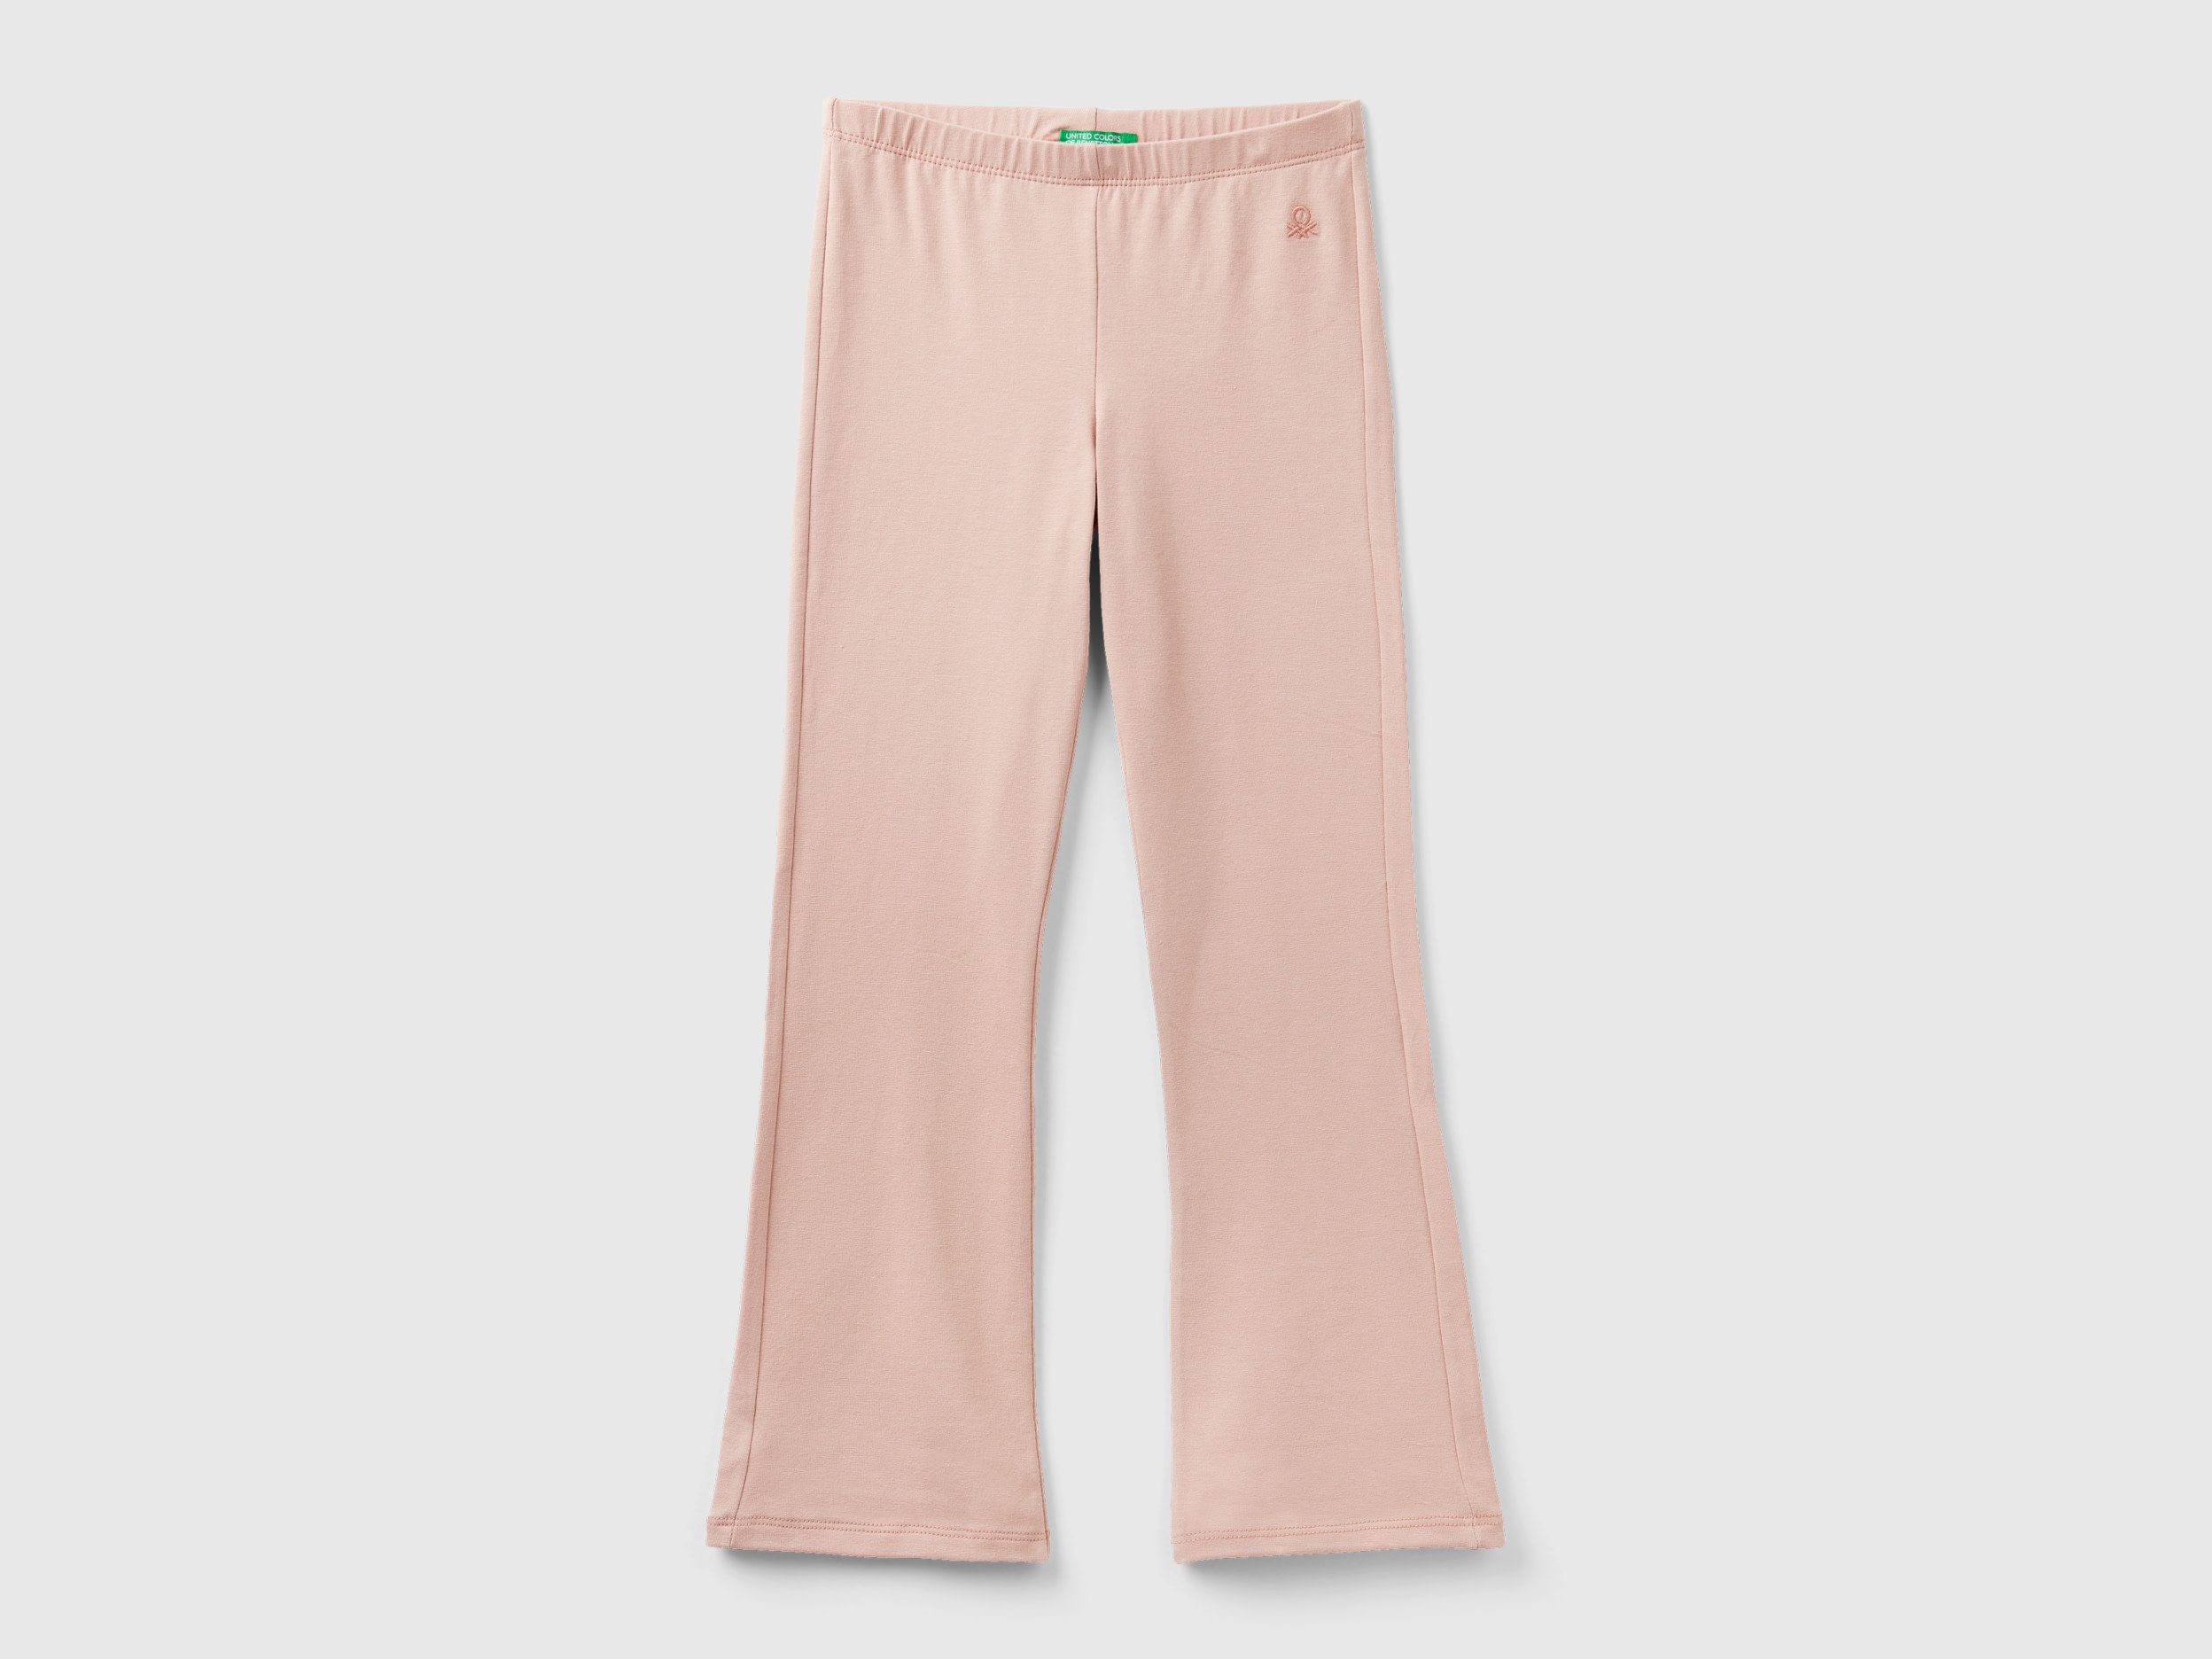 Benetton, Flared Leggings In Stretch Cotton, size S, Nude, Kids